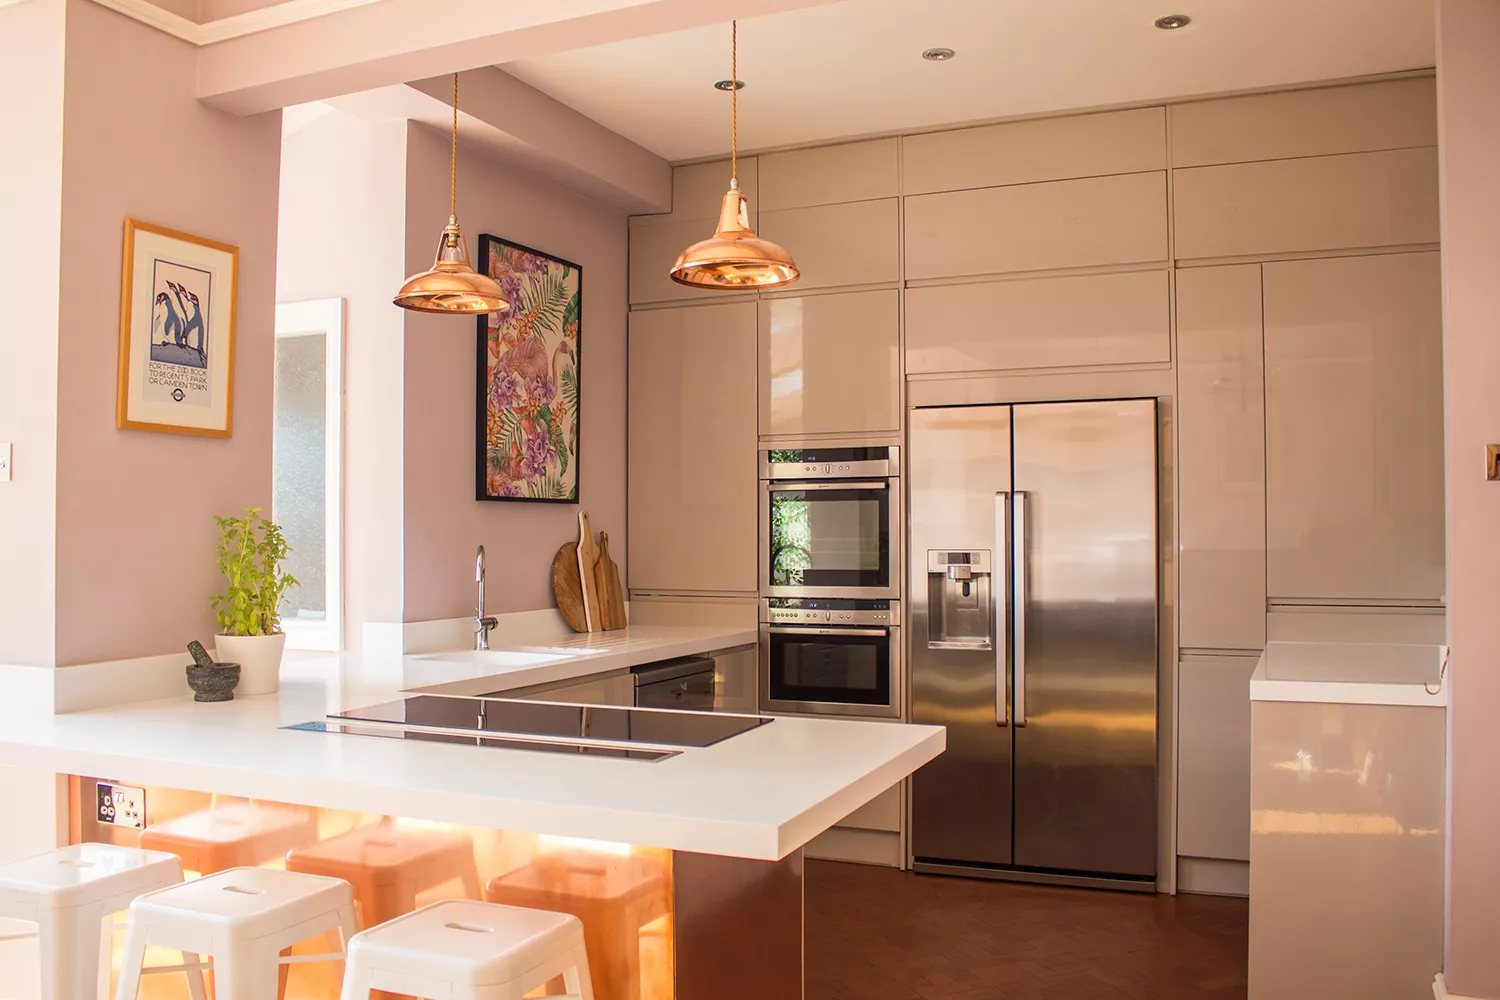 A view if the contemporary copper kitchen featuring the copper pendant lights from Artifact Lighting.